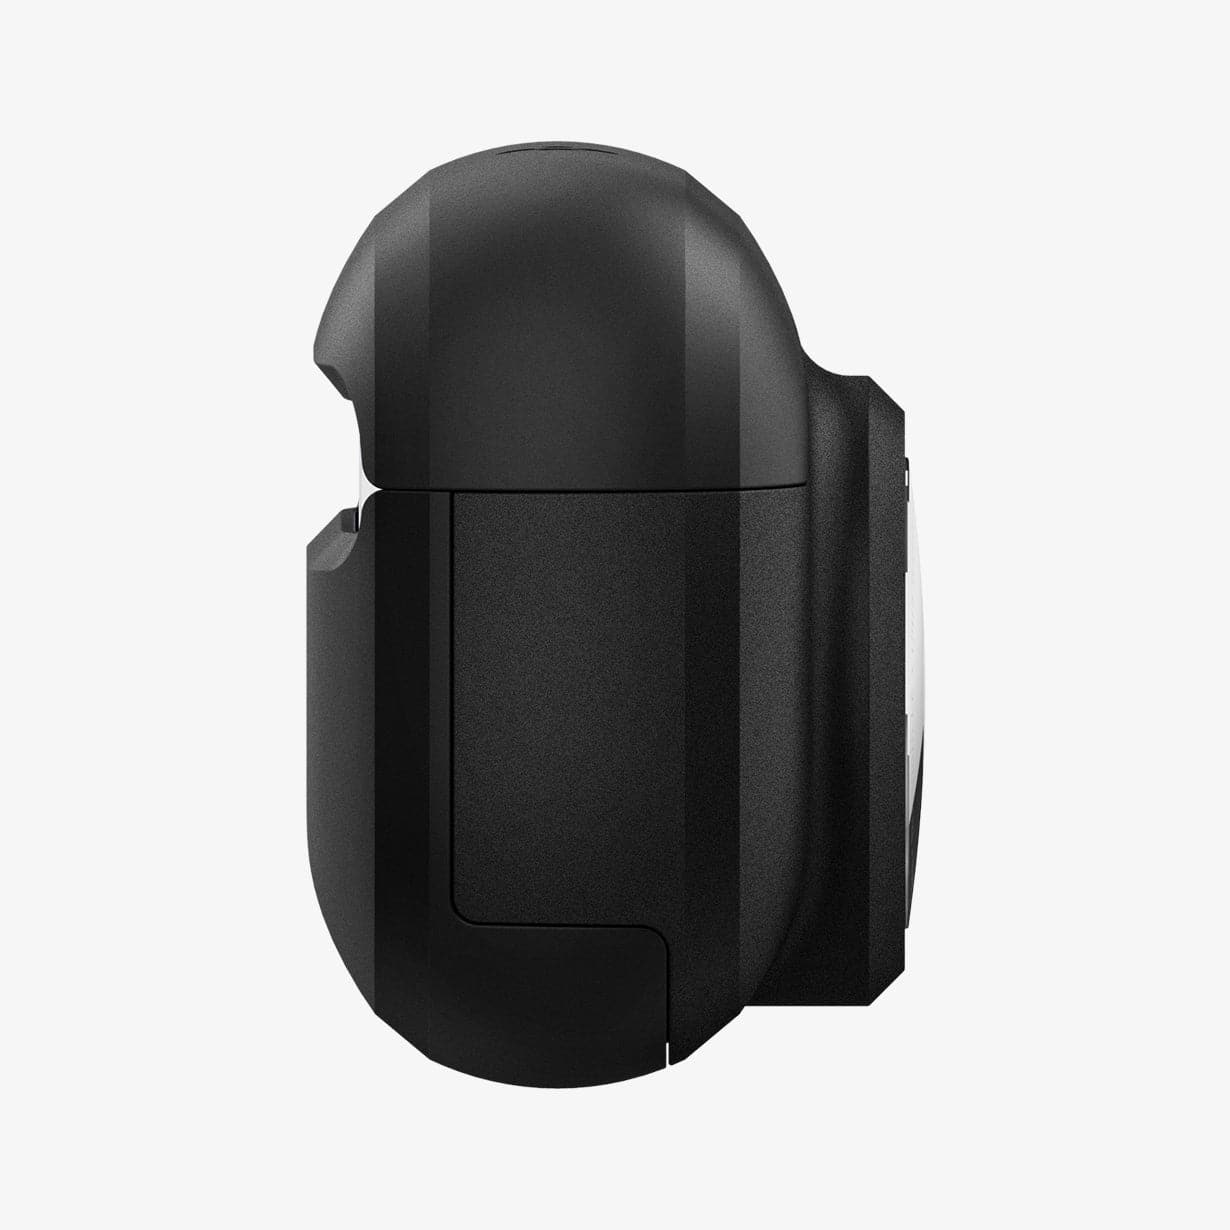 ACS03167 - Apple AirPods Pro Case Tag Armor Duo in black showing the side